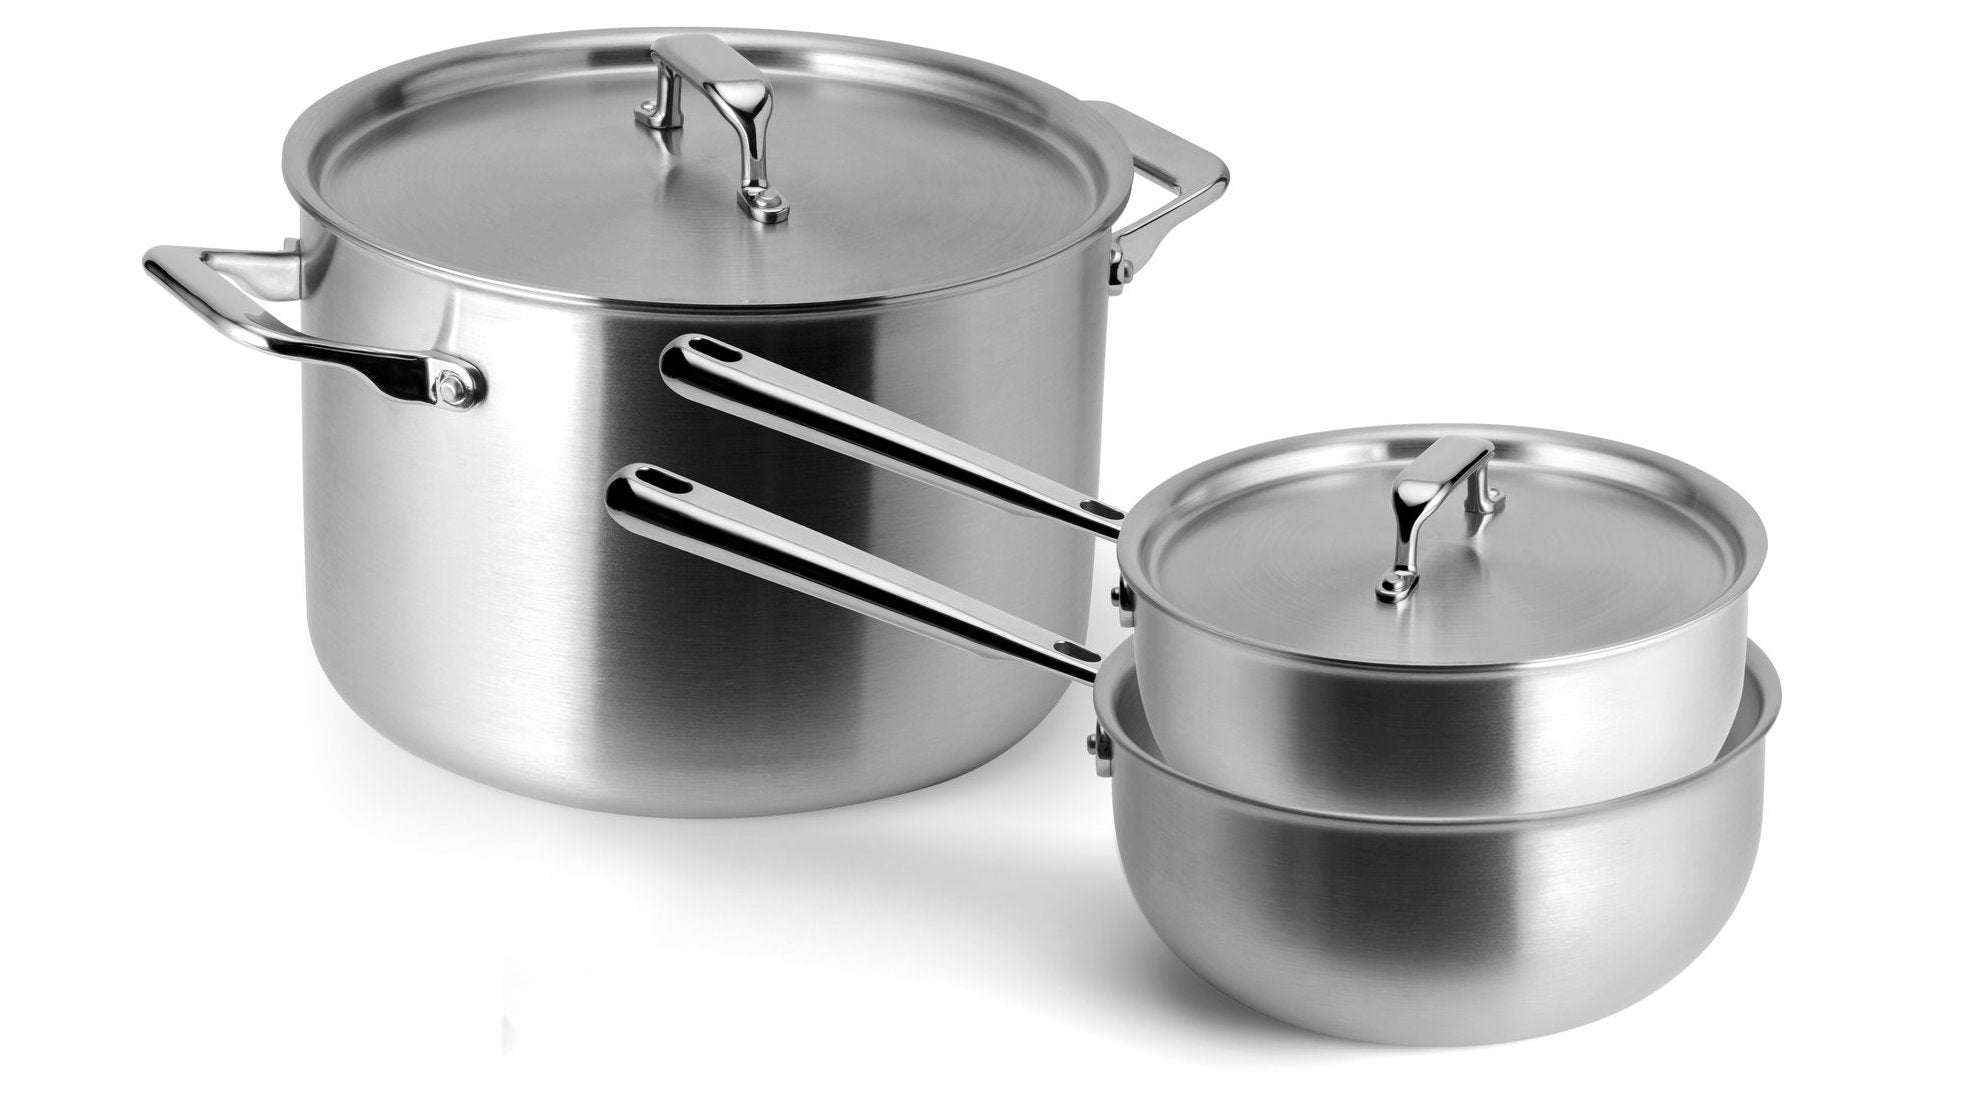 12 - Piece Non-Stick Stainless Steel (18/8) Cookware Set Bloomhouse